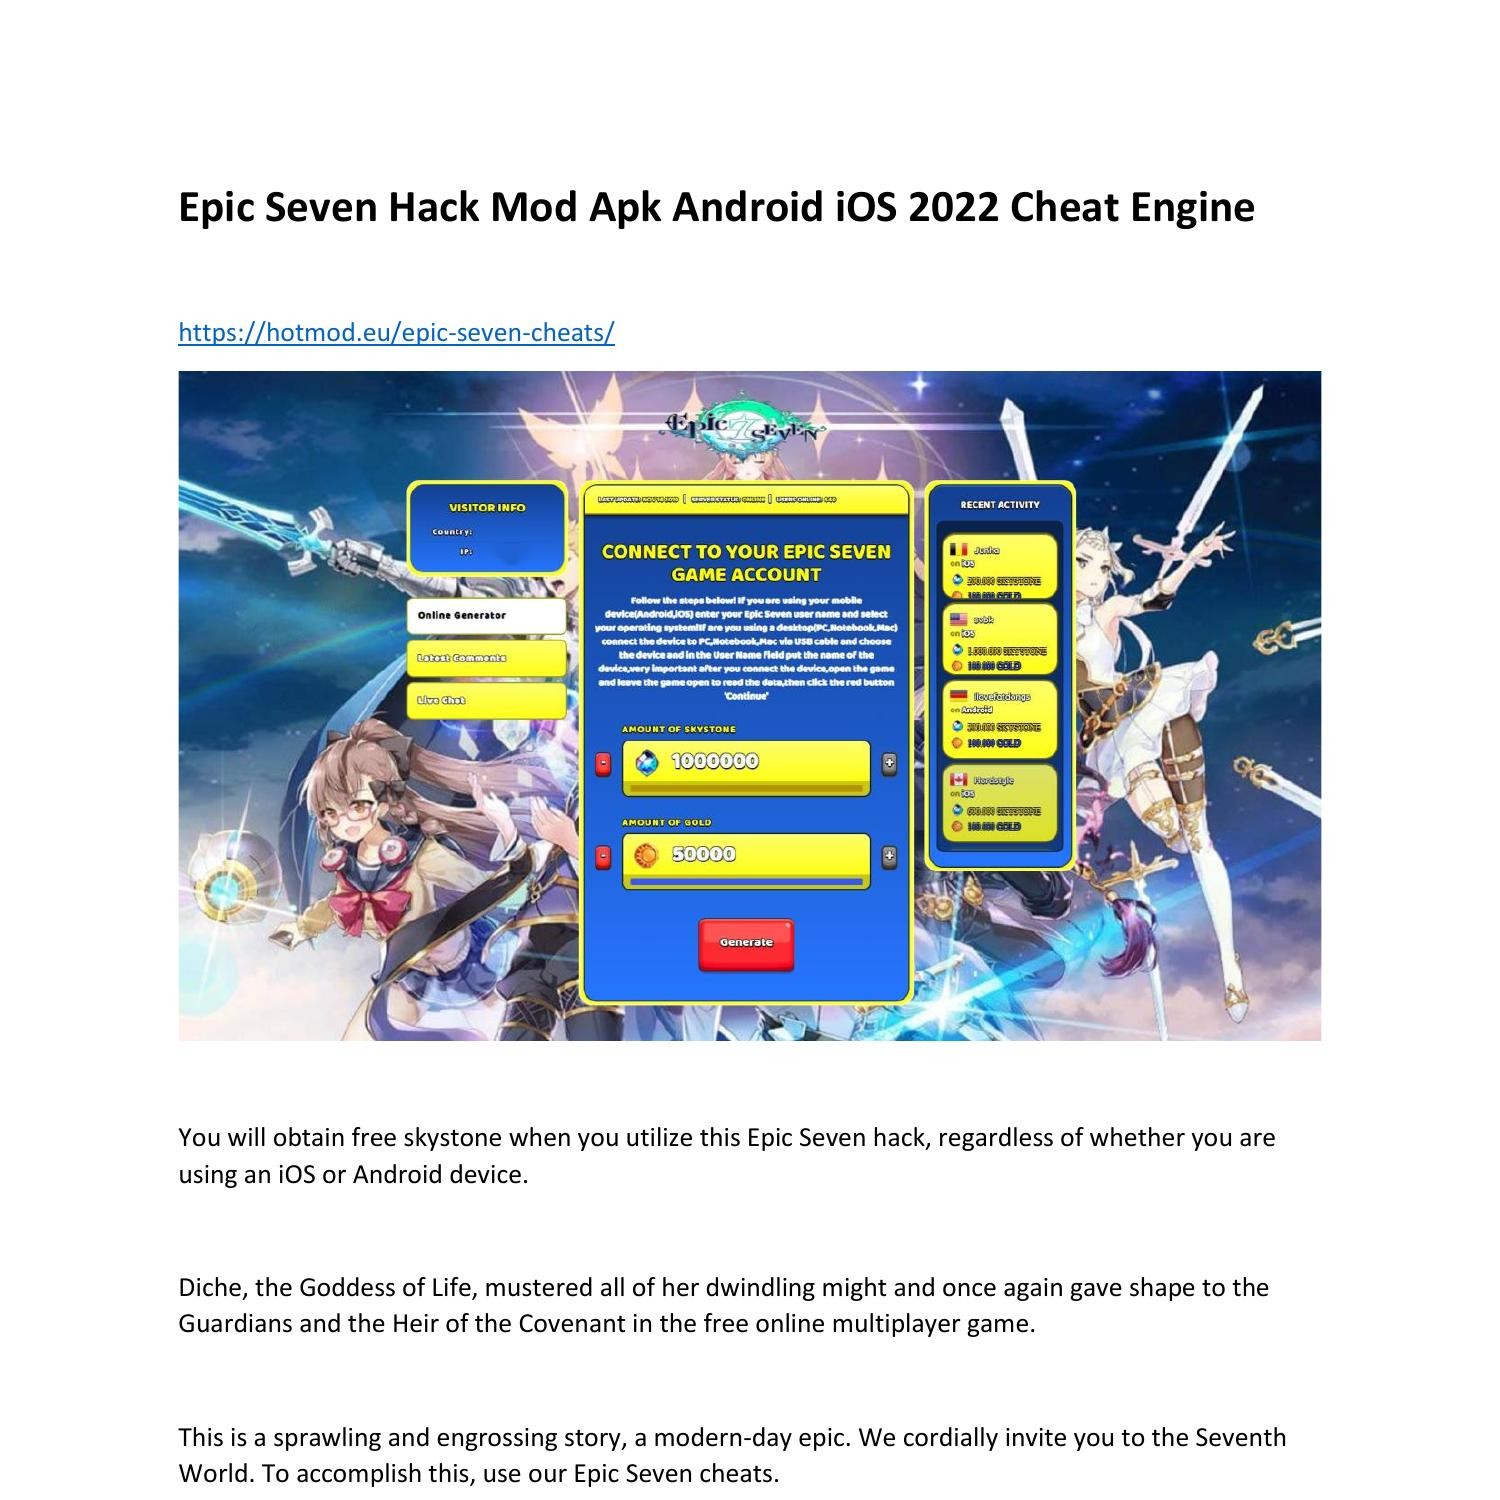 Cheat Engine APK APK for Android Download